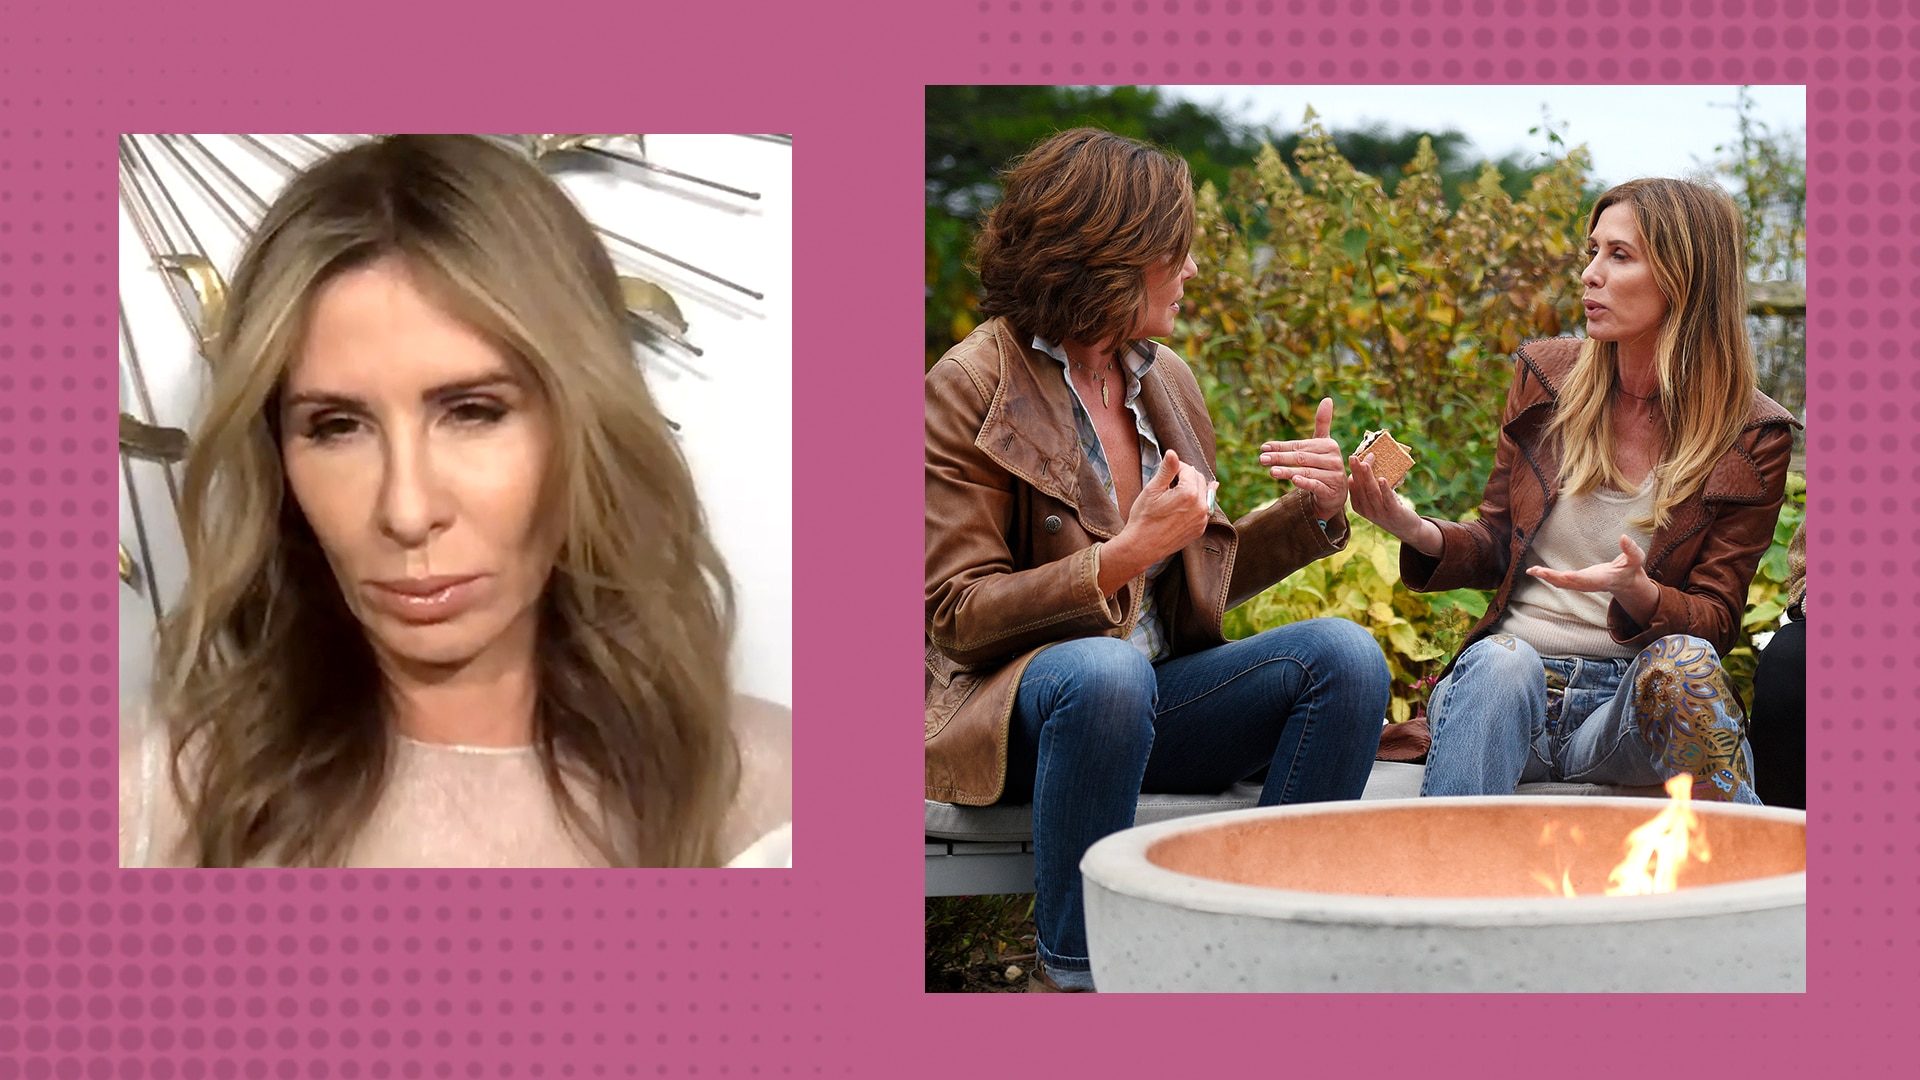 Carole Radziwill Reveals the Most Hurtful Moment on The Real Housewives of New York City